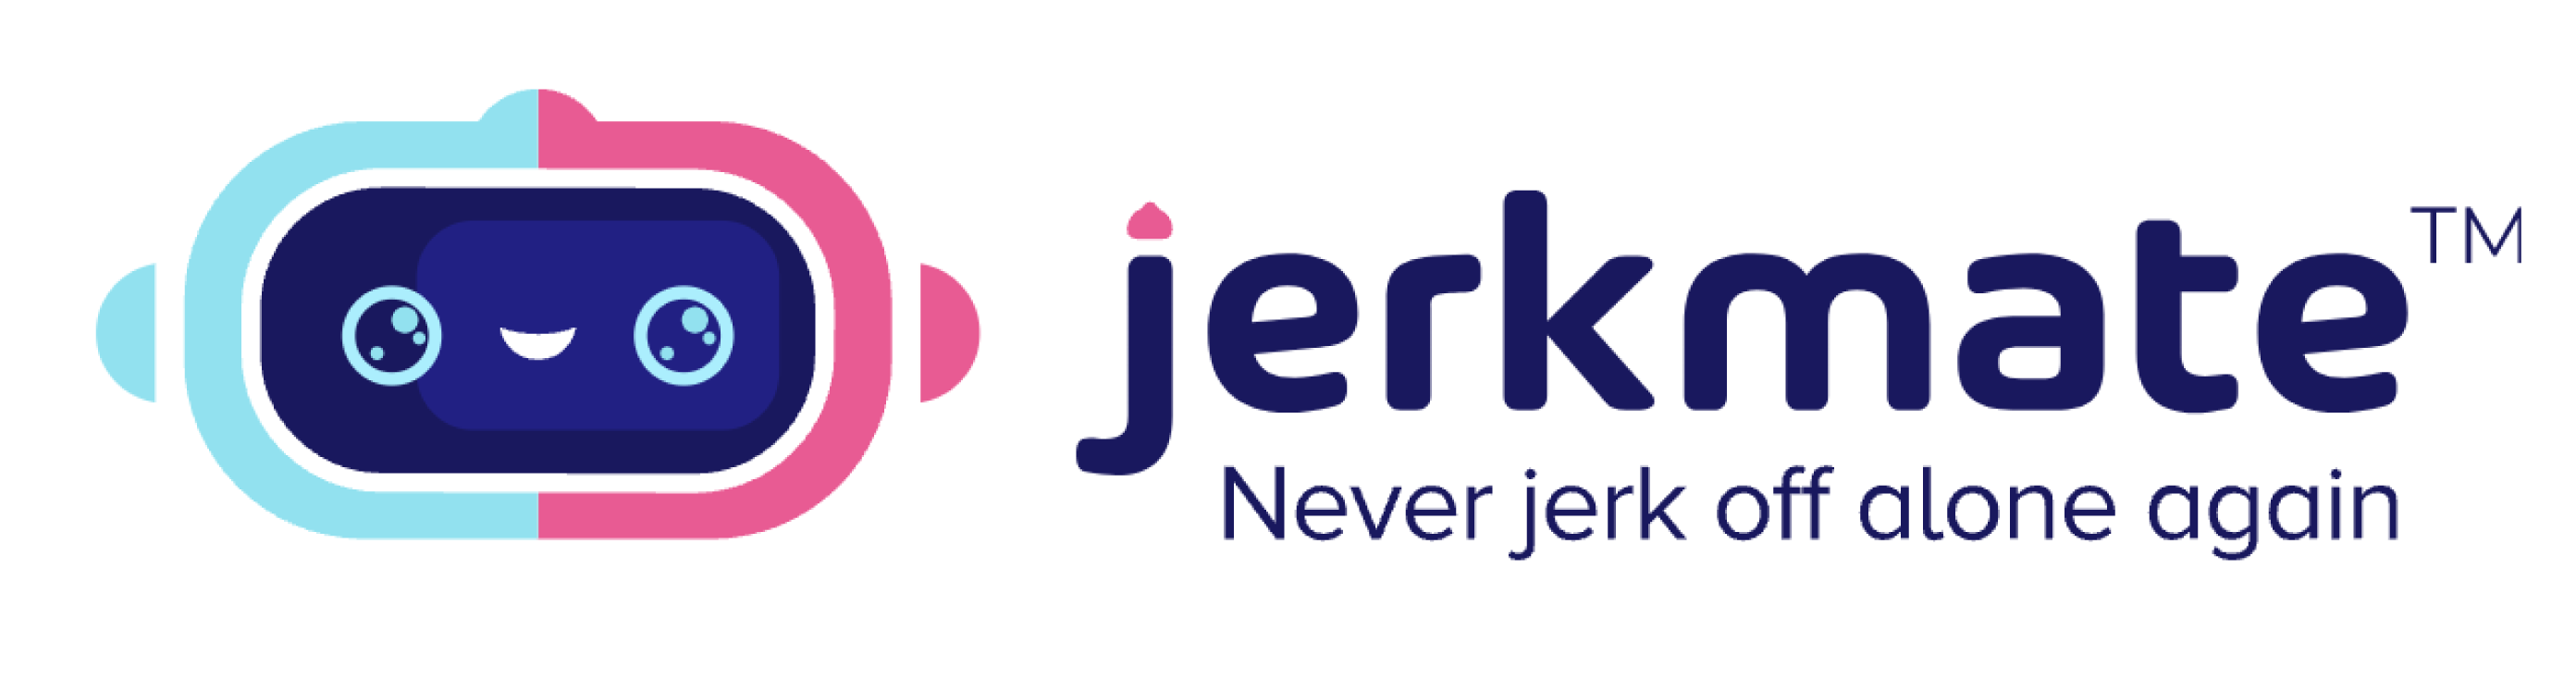 chikyla coleman recommends jerkmate interactive ads pic